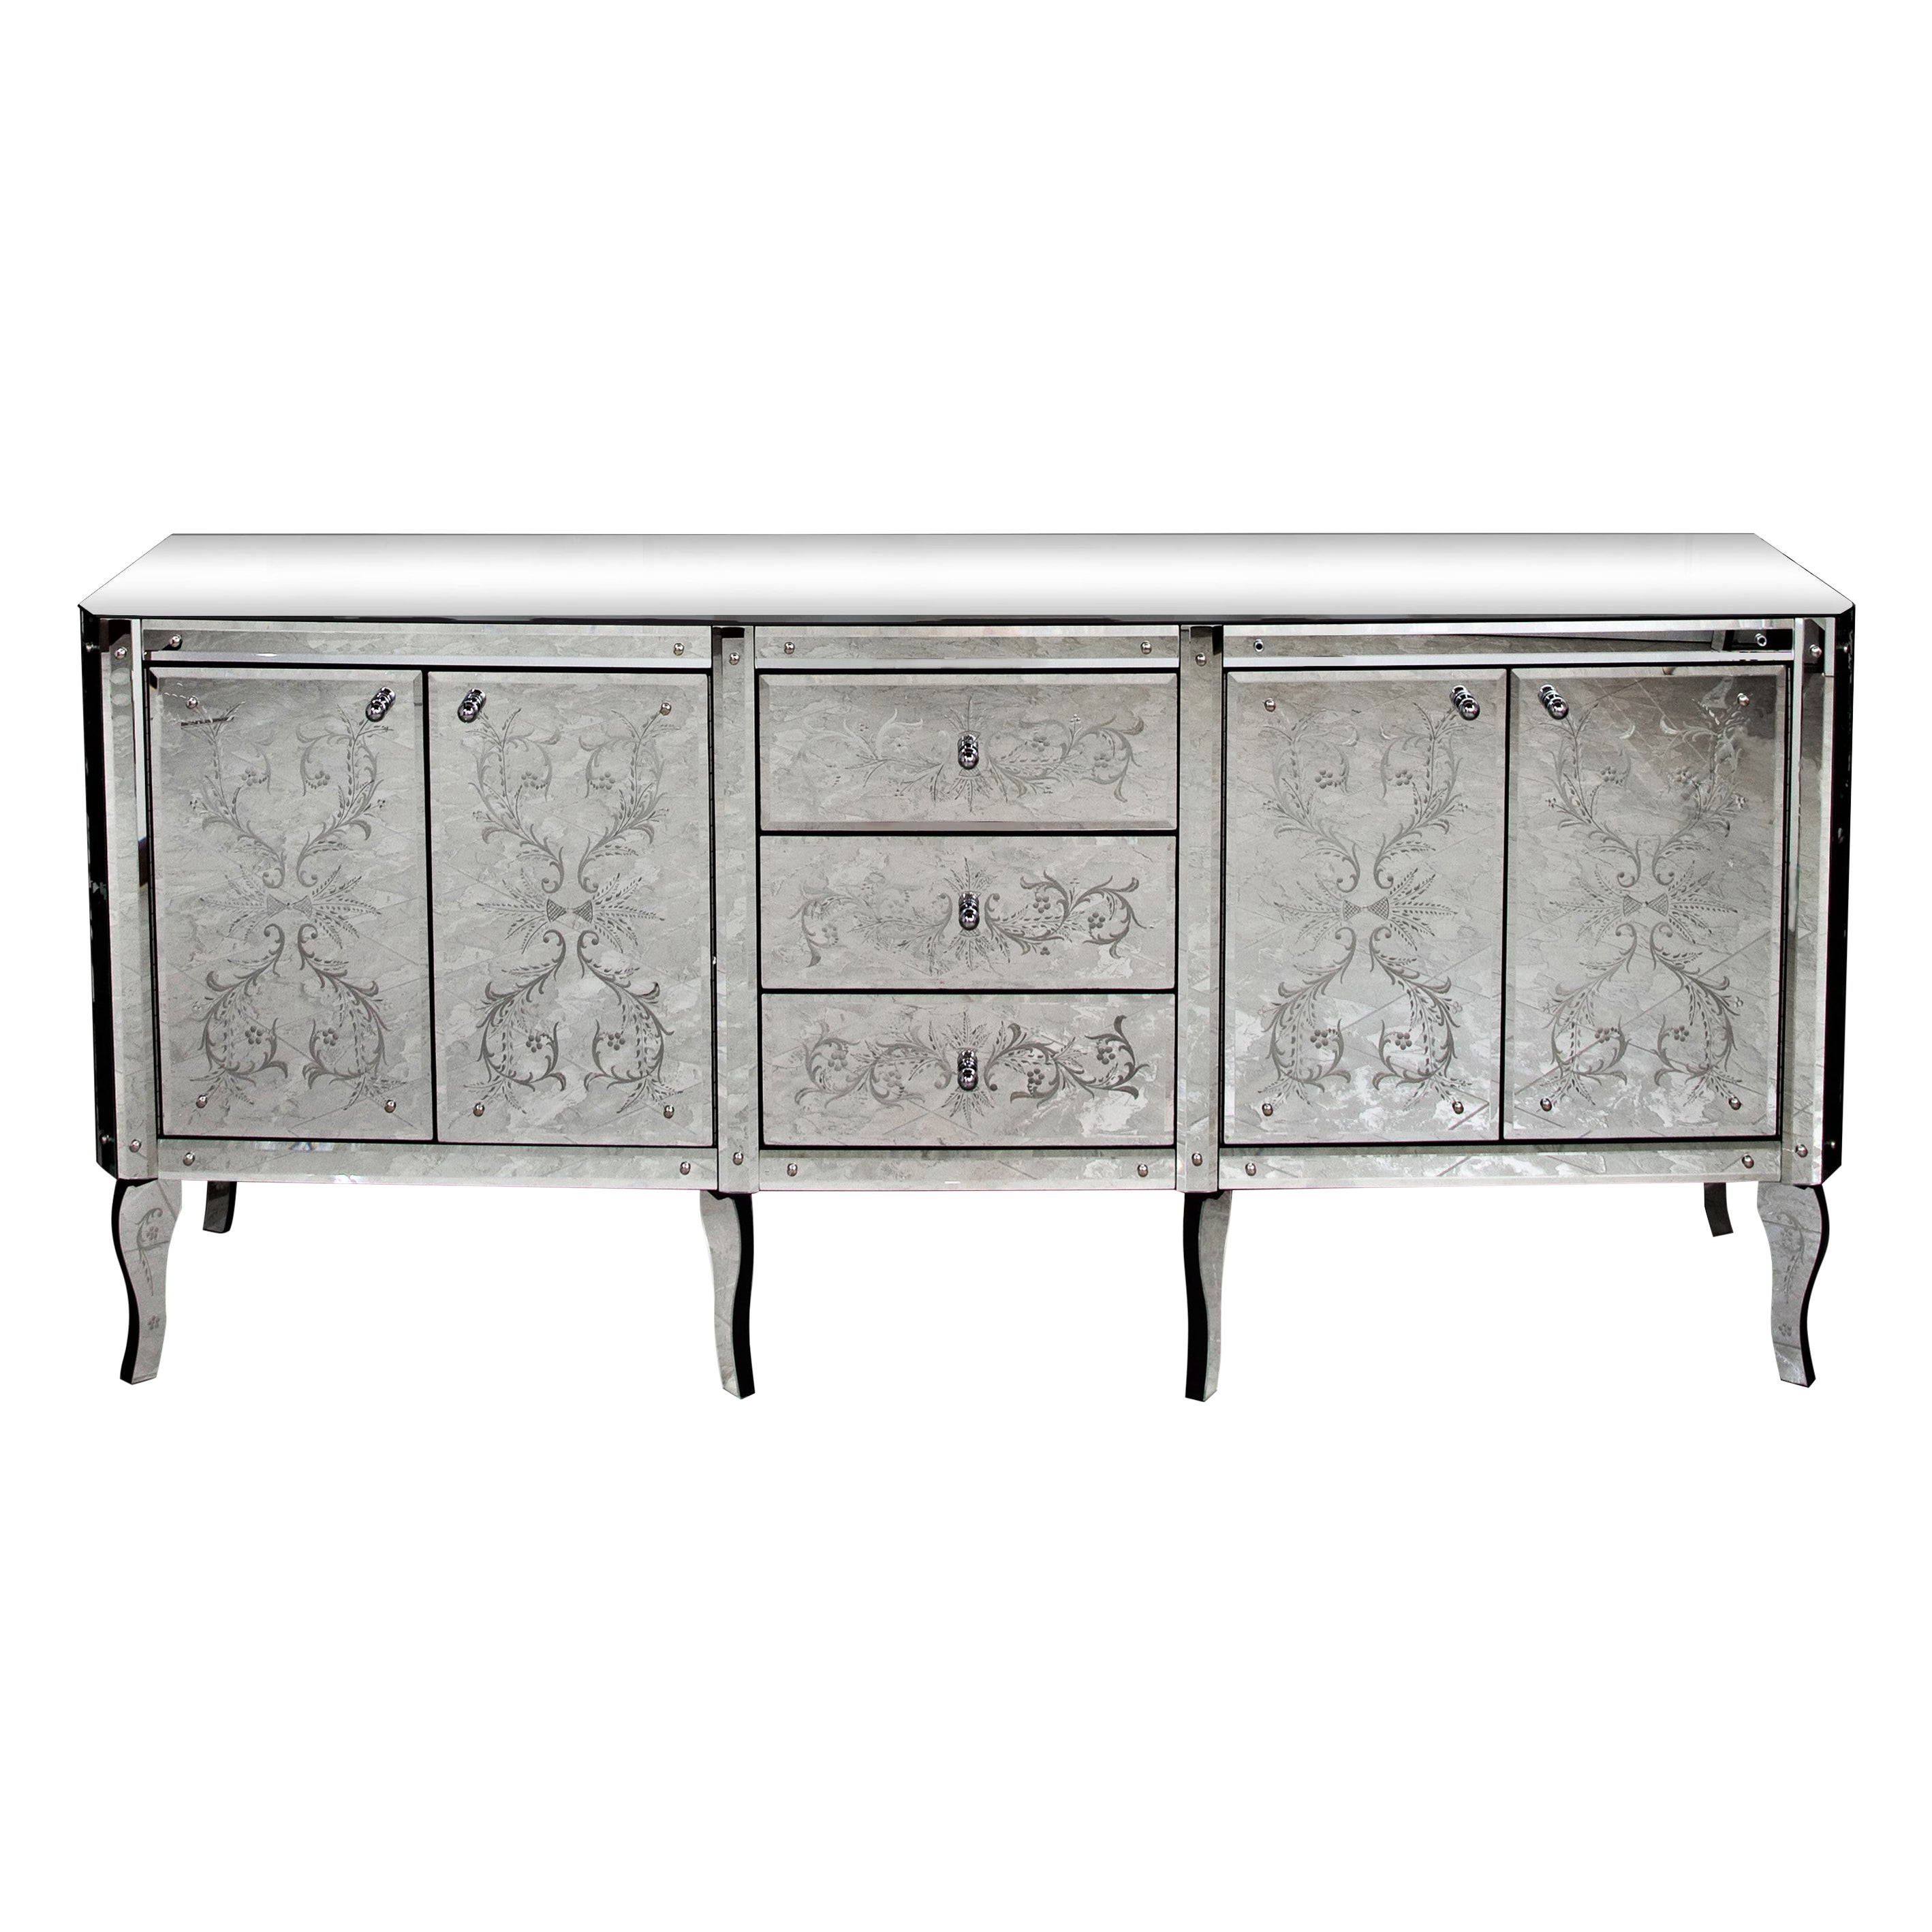 "Ca' Corner" Luxurious Sideboard in Murano Glass Mirror by Fratelli Tosi For Sale